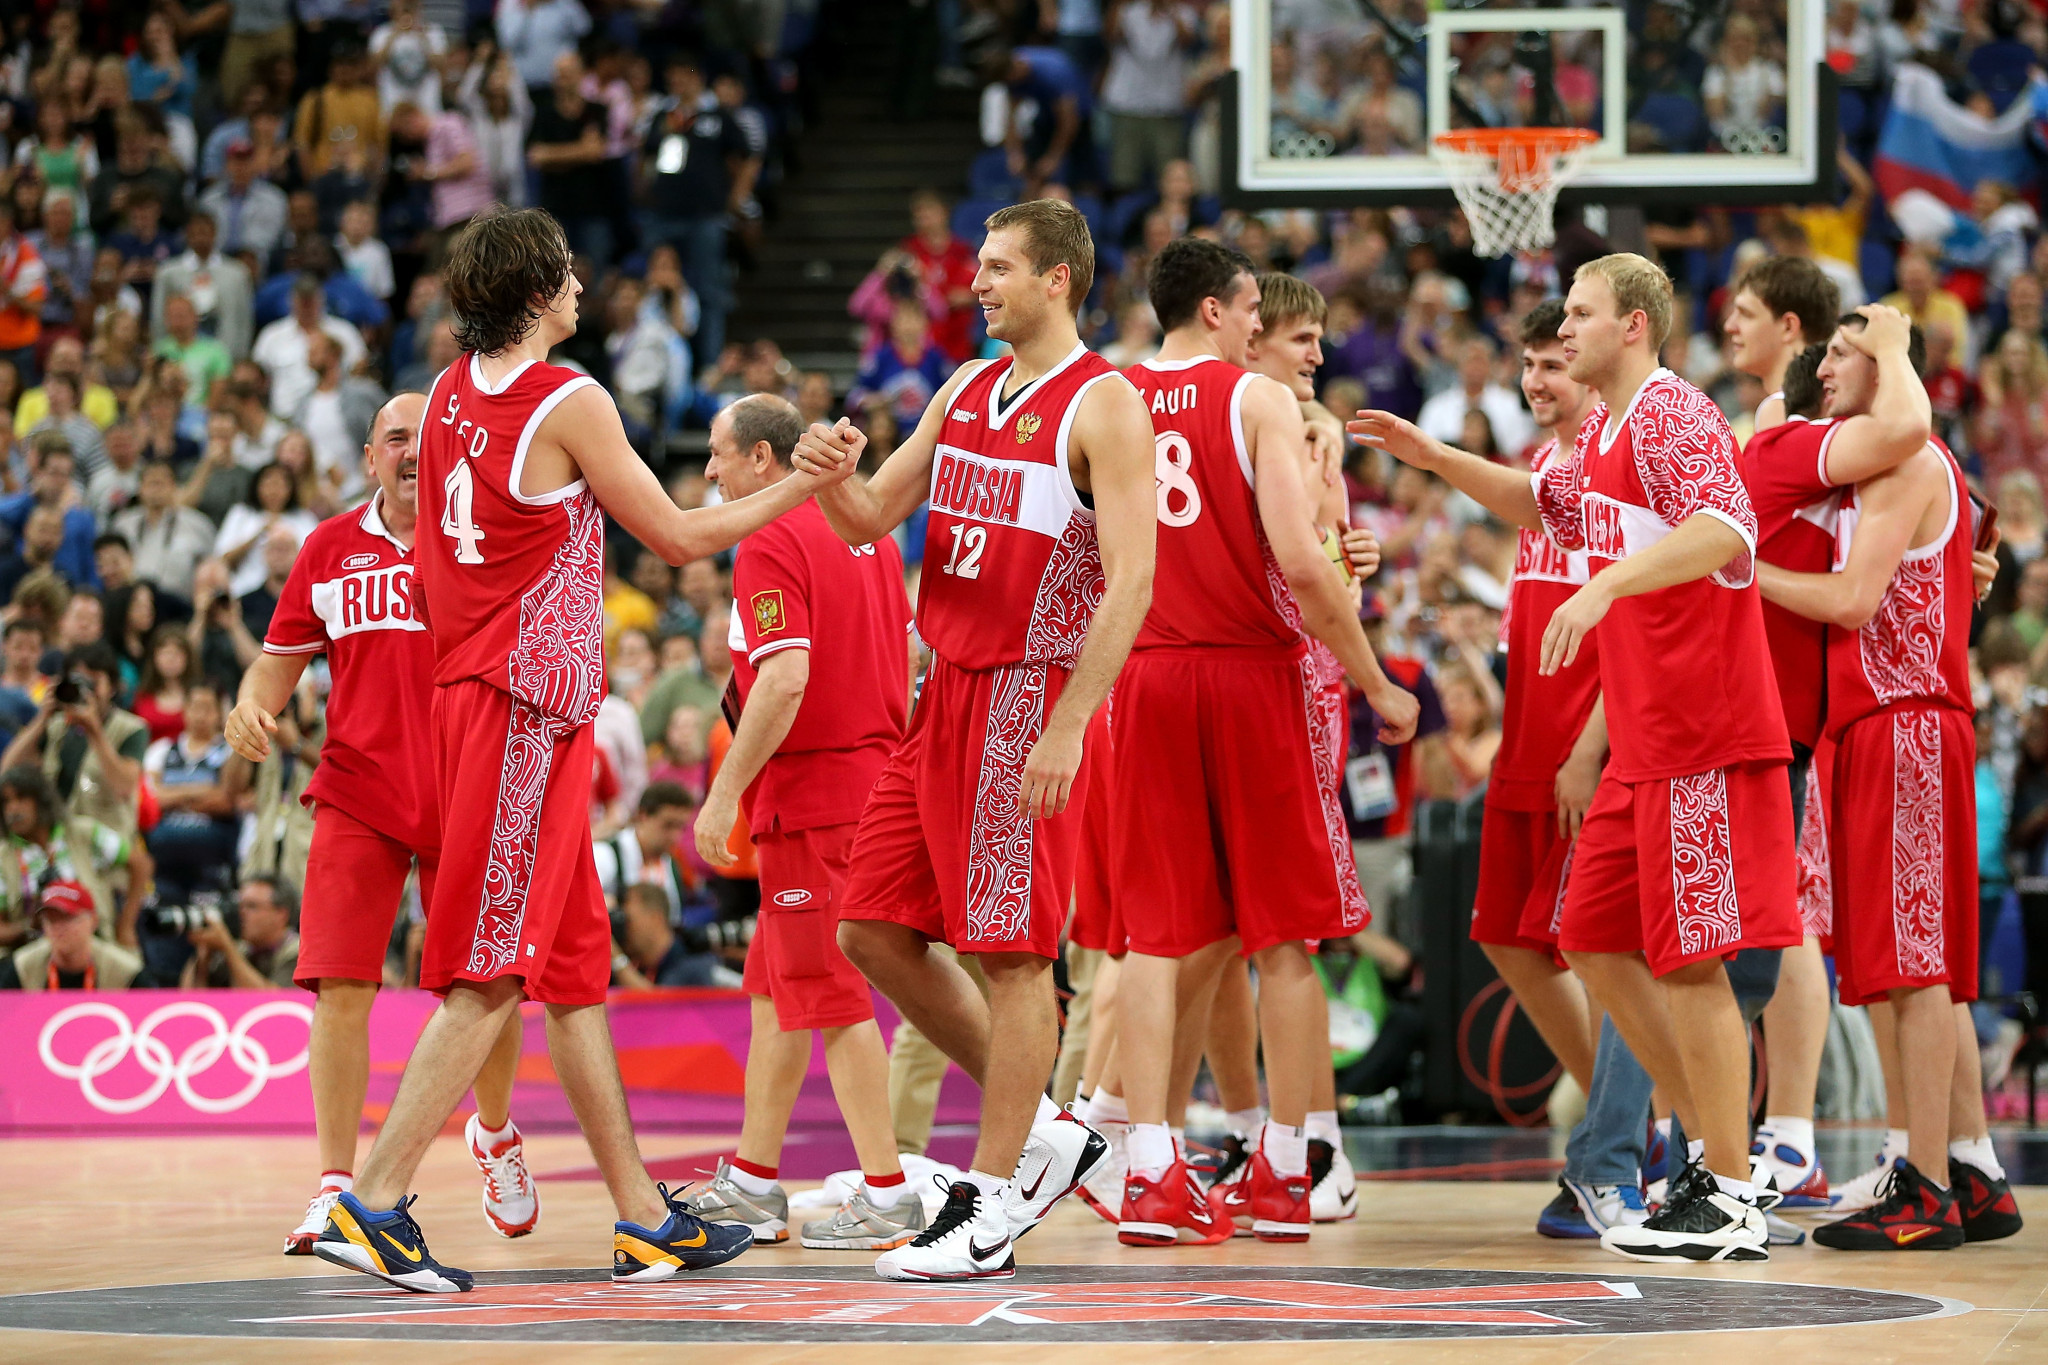 Russia's men's basketball team banned from Paris 2024 Olympics